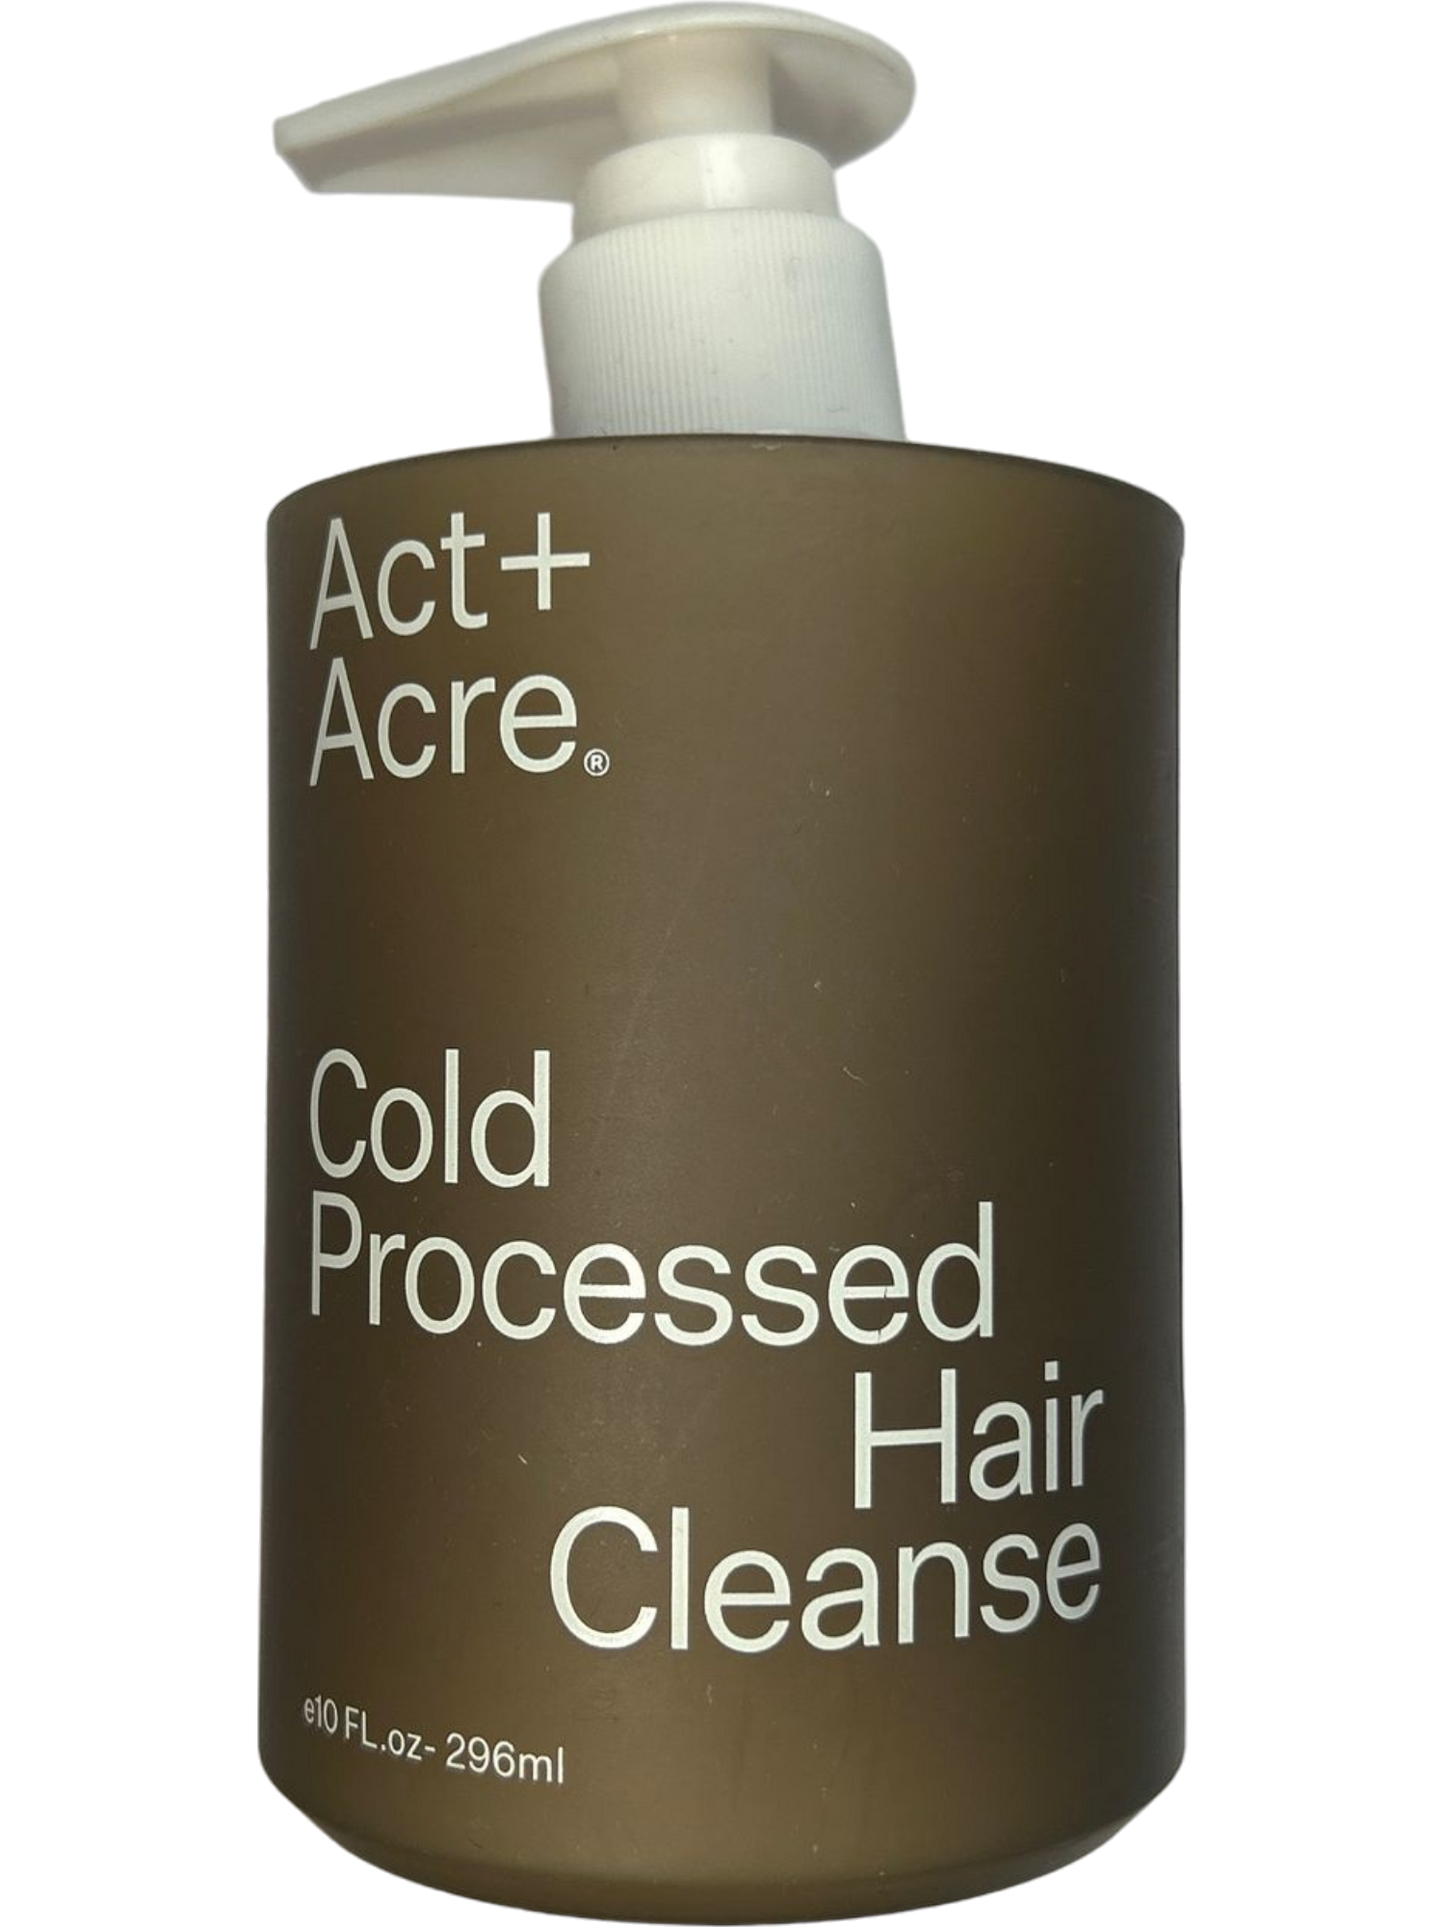 Act+Acre Plant-Derived Cold Processed Cleanse Shampoo 10oz